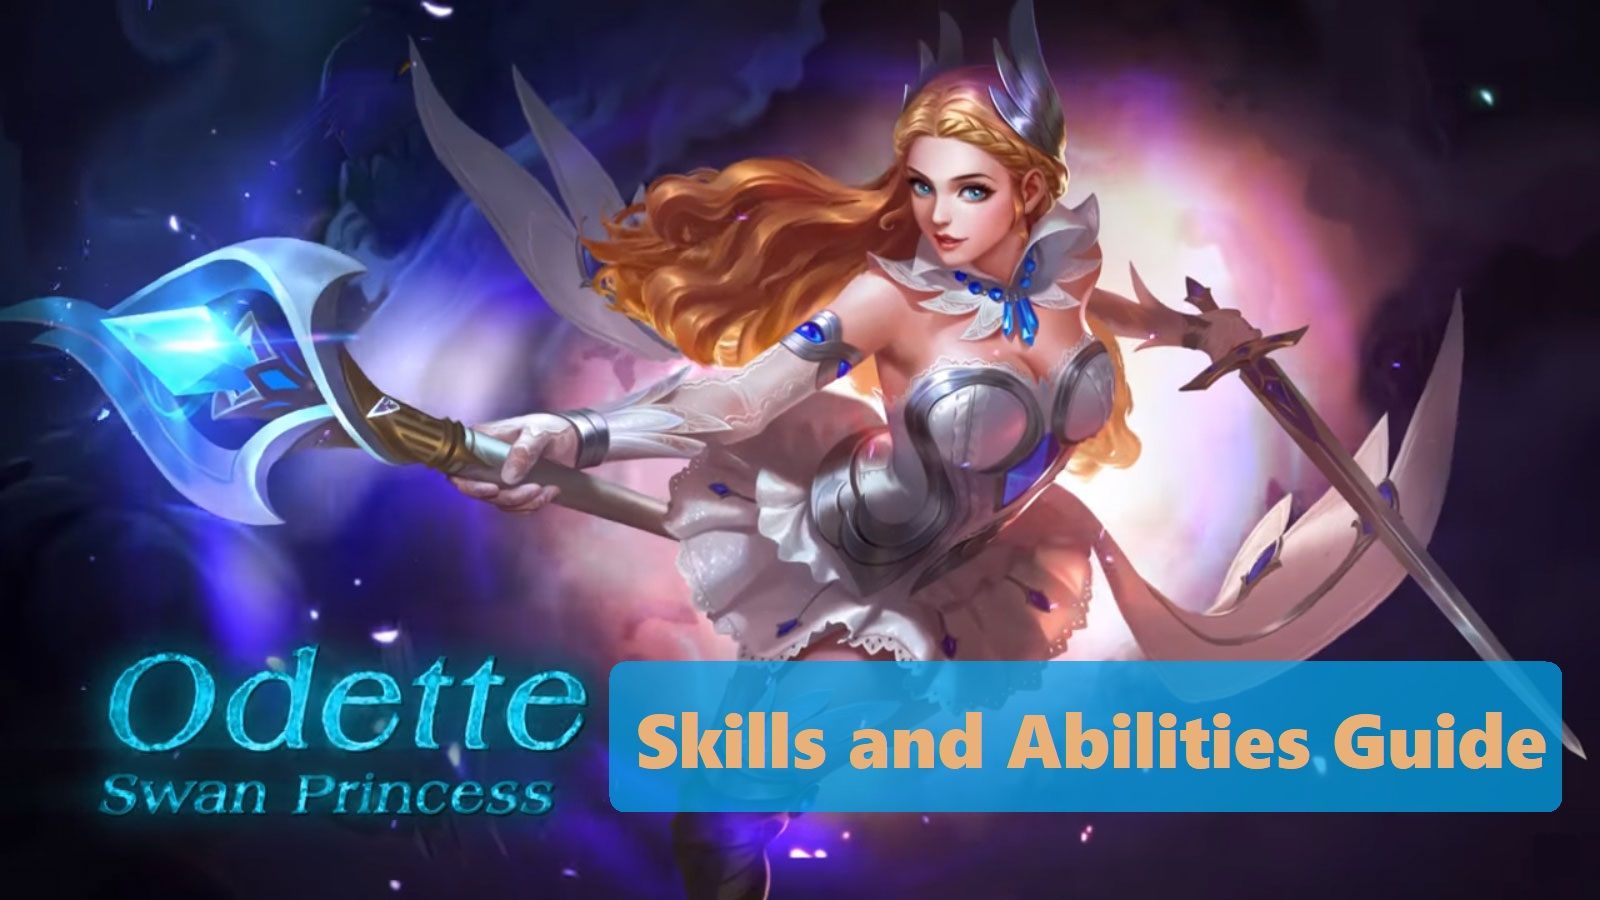 Mobile Legends: Odette's Skills and Abilities Guide